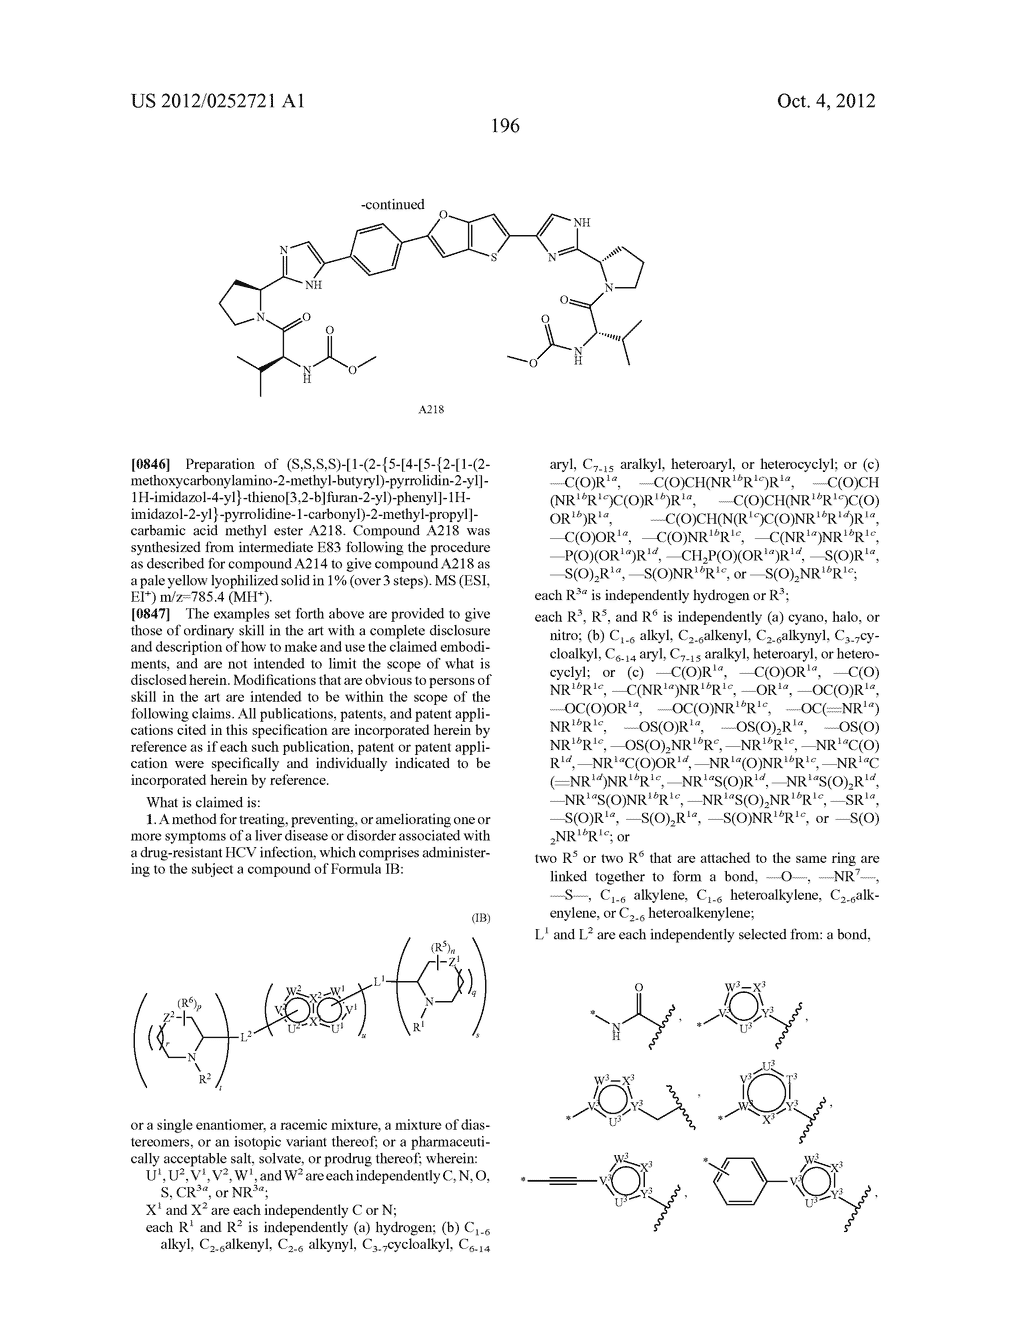 METHODS FOR TREATING DRUG-RESISTANT HEPATITIS C VIRUS INFECTION WITH A     5,5-FUSED ARYLENE OR HETEROARYLENE HEPATITIS C VIRUS INHIBITOR - diagram, schematic, and image 197